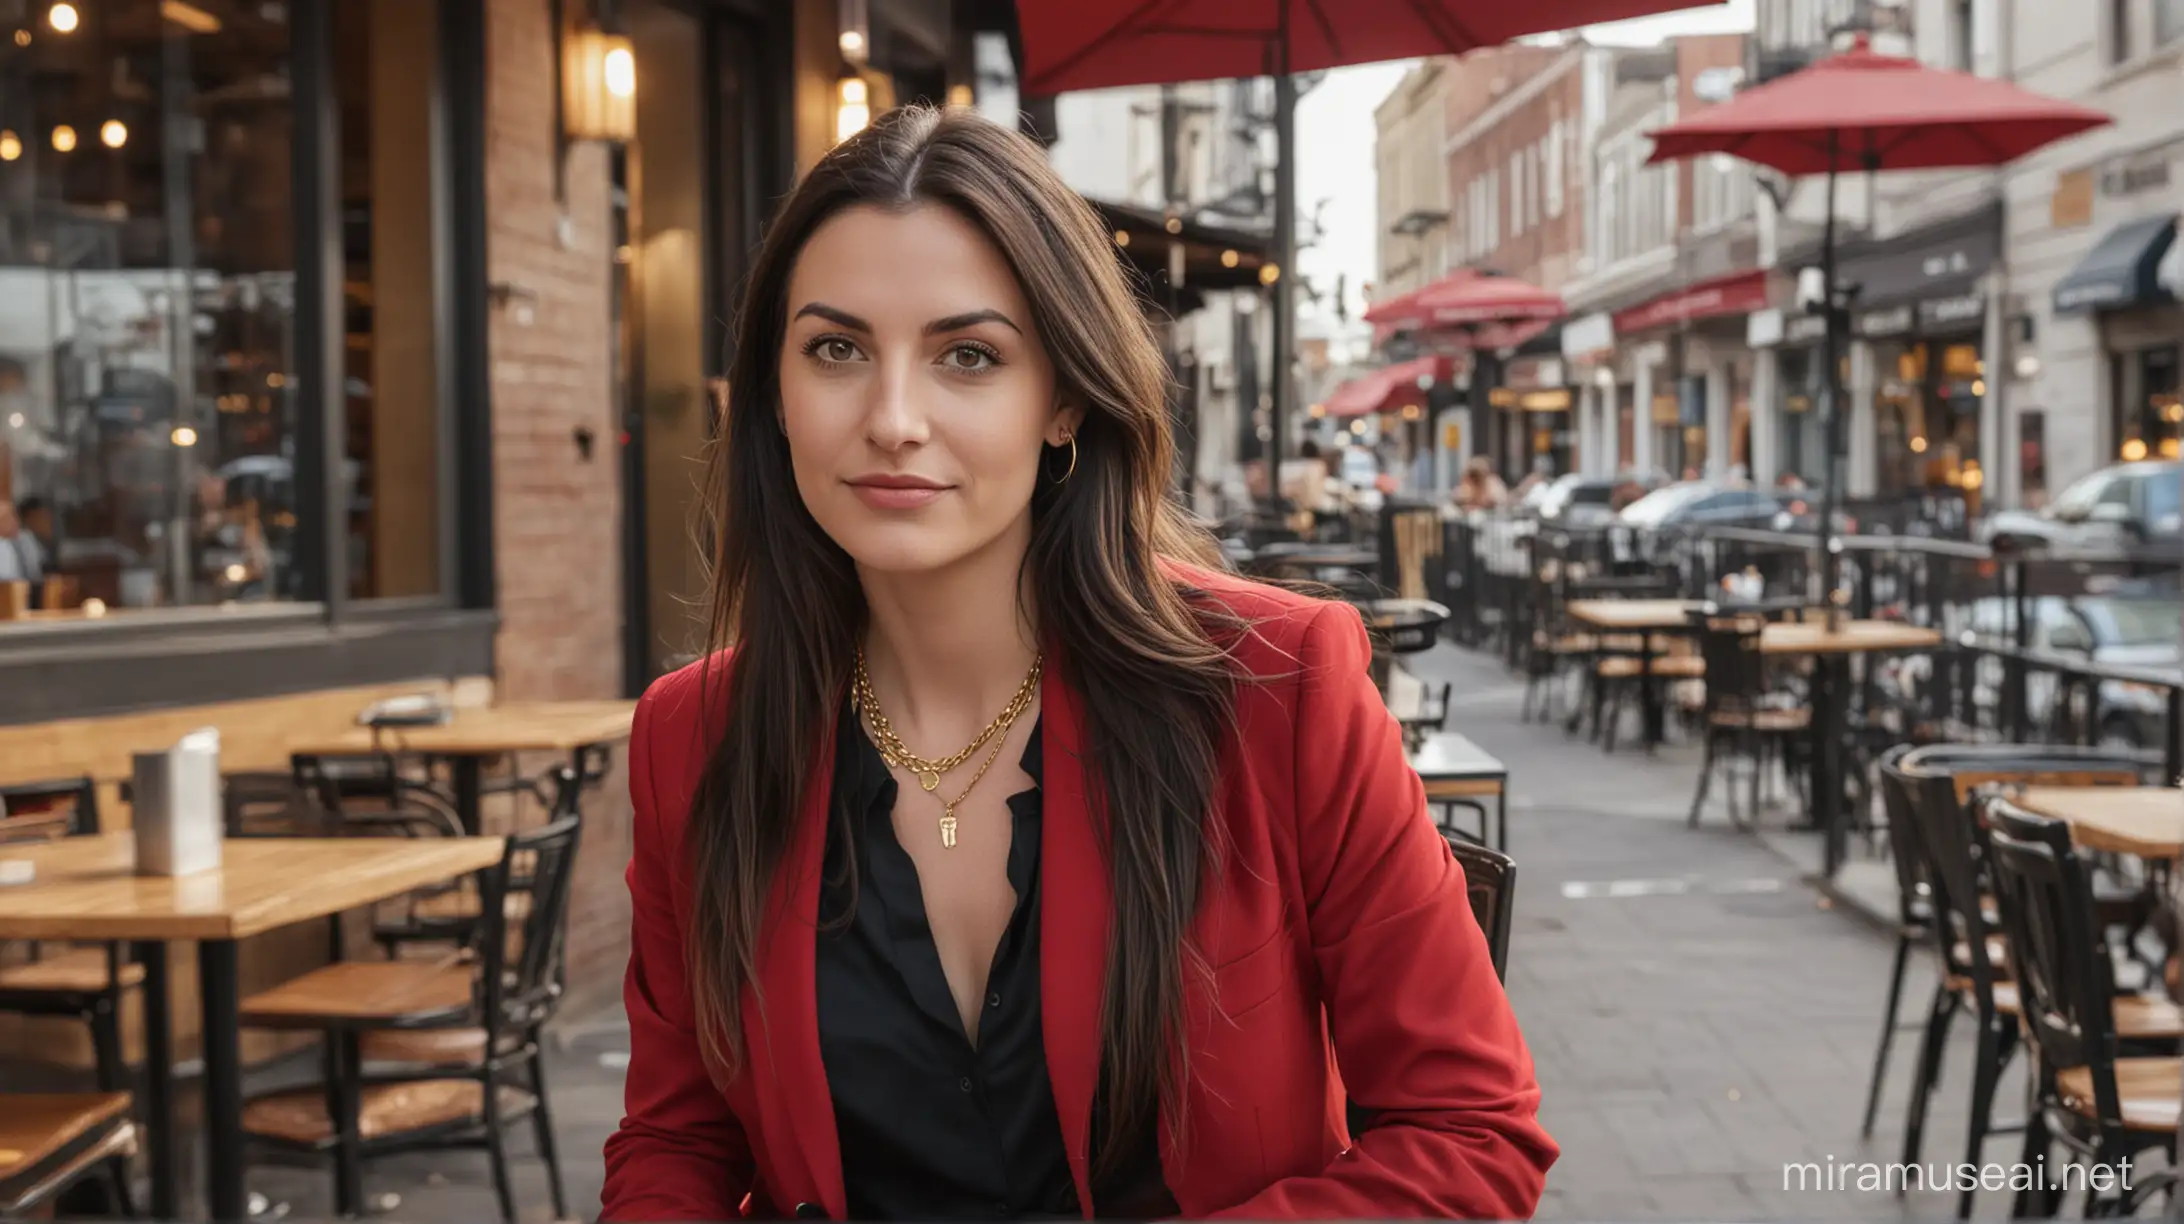 30 year old white woman with long dark brown hair wearing a gold necklace, red blazer, low cut black shirt and black dress pants. She is sitting down, staring at camera, urban outdoor café background. In the background in the distance there is a waiter with black hair and mustache.